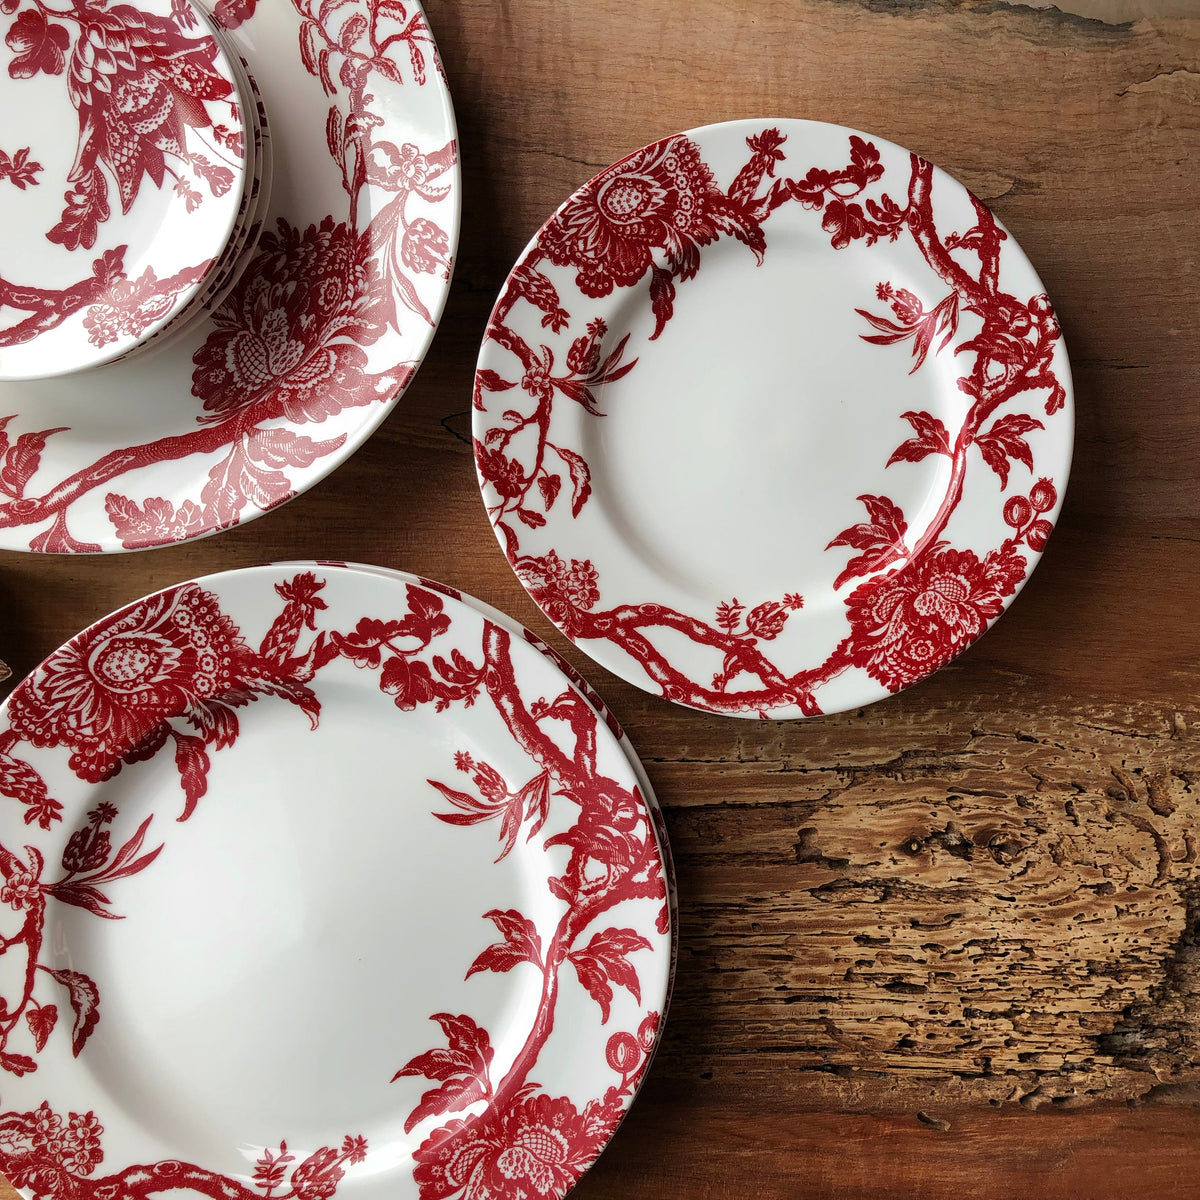 The red and white porcelain Arcadia Crimson Canapé Plates from Caskata coordinate with dinner and salad plates from the collection.